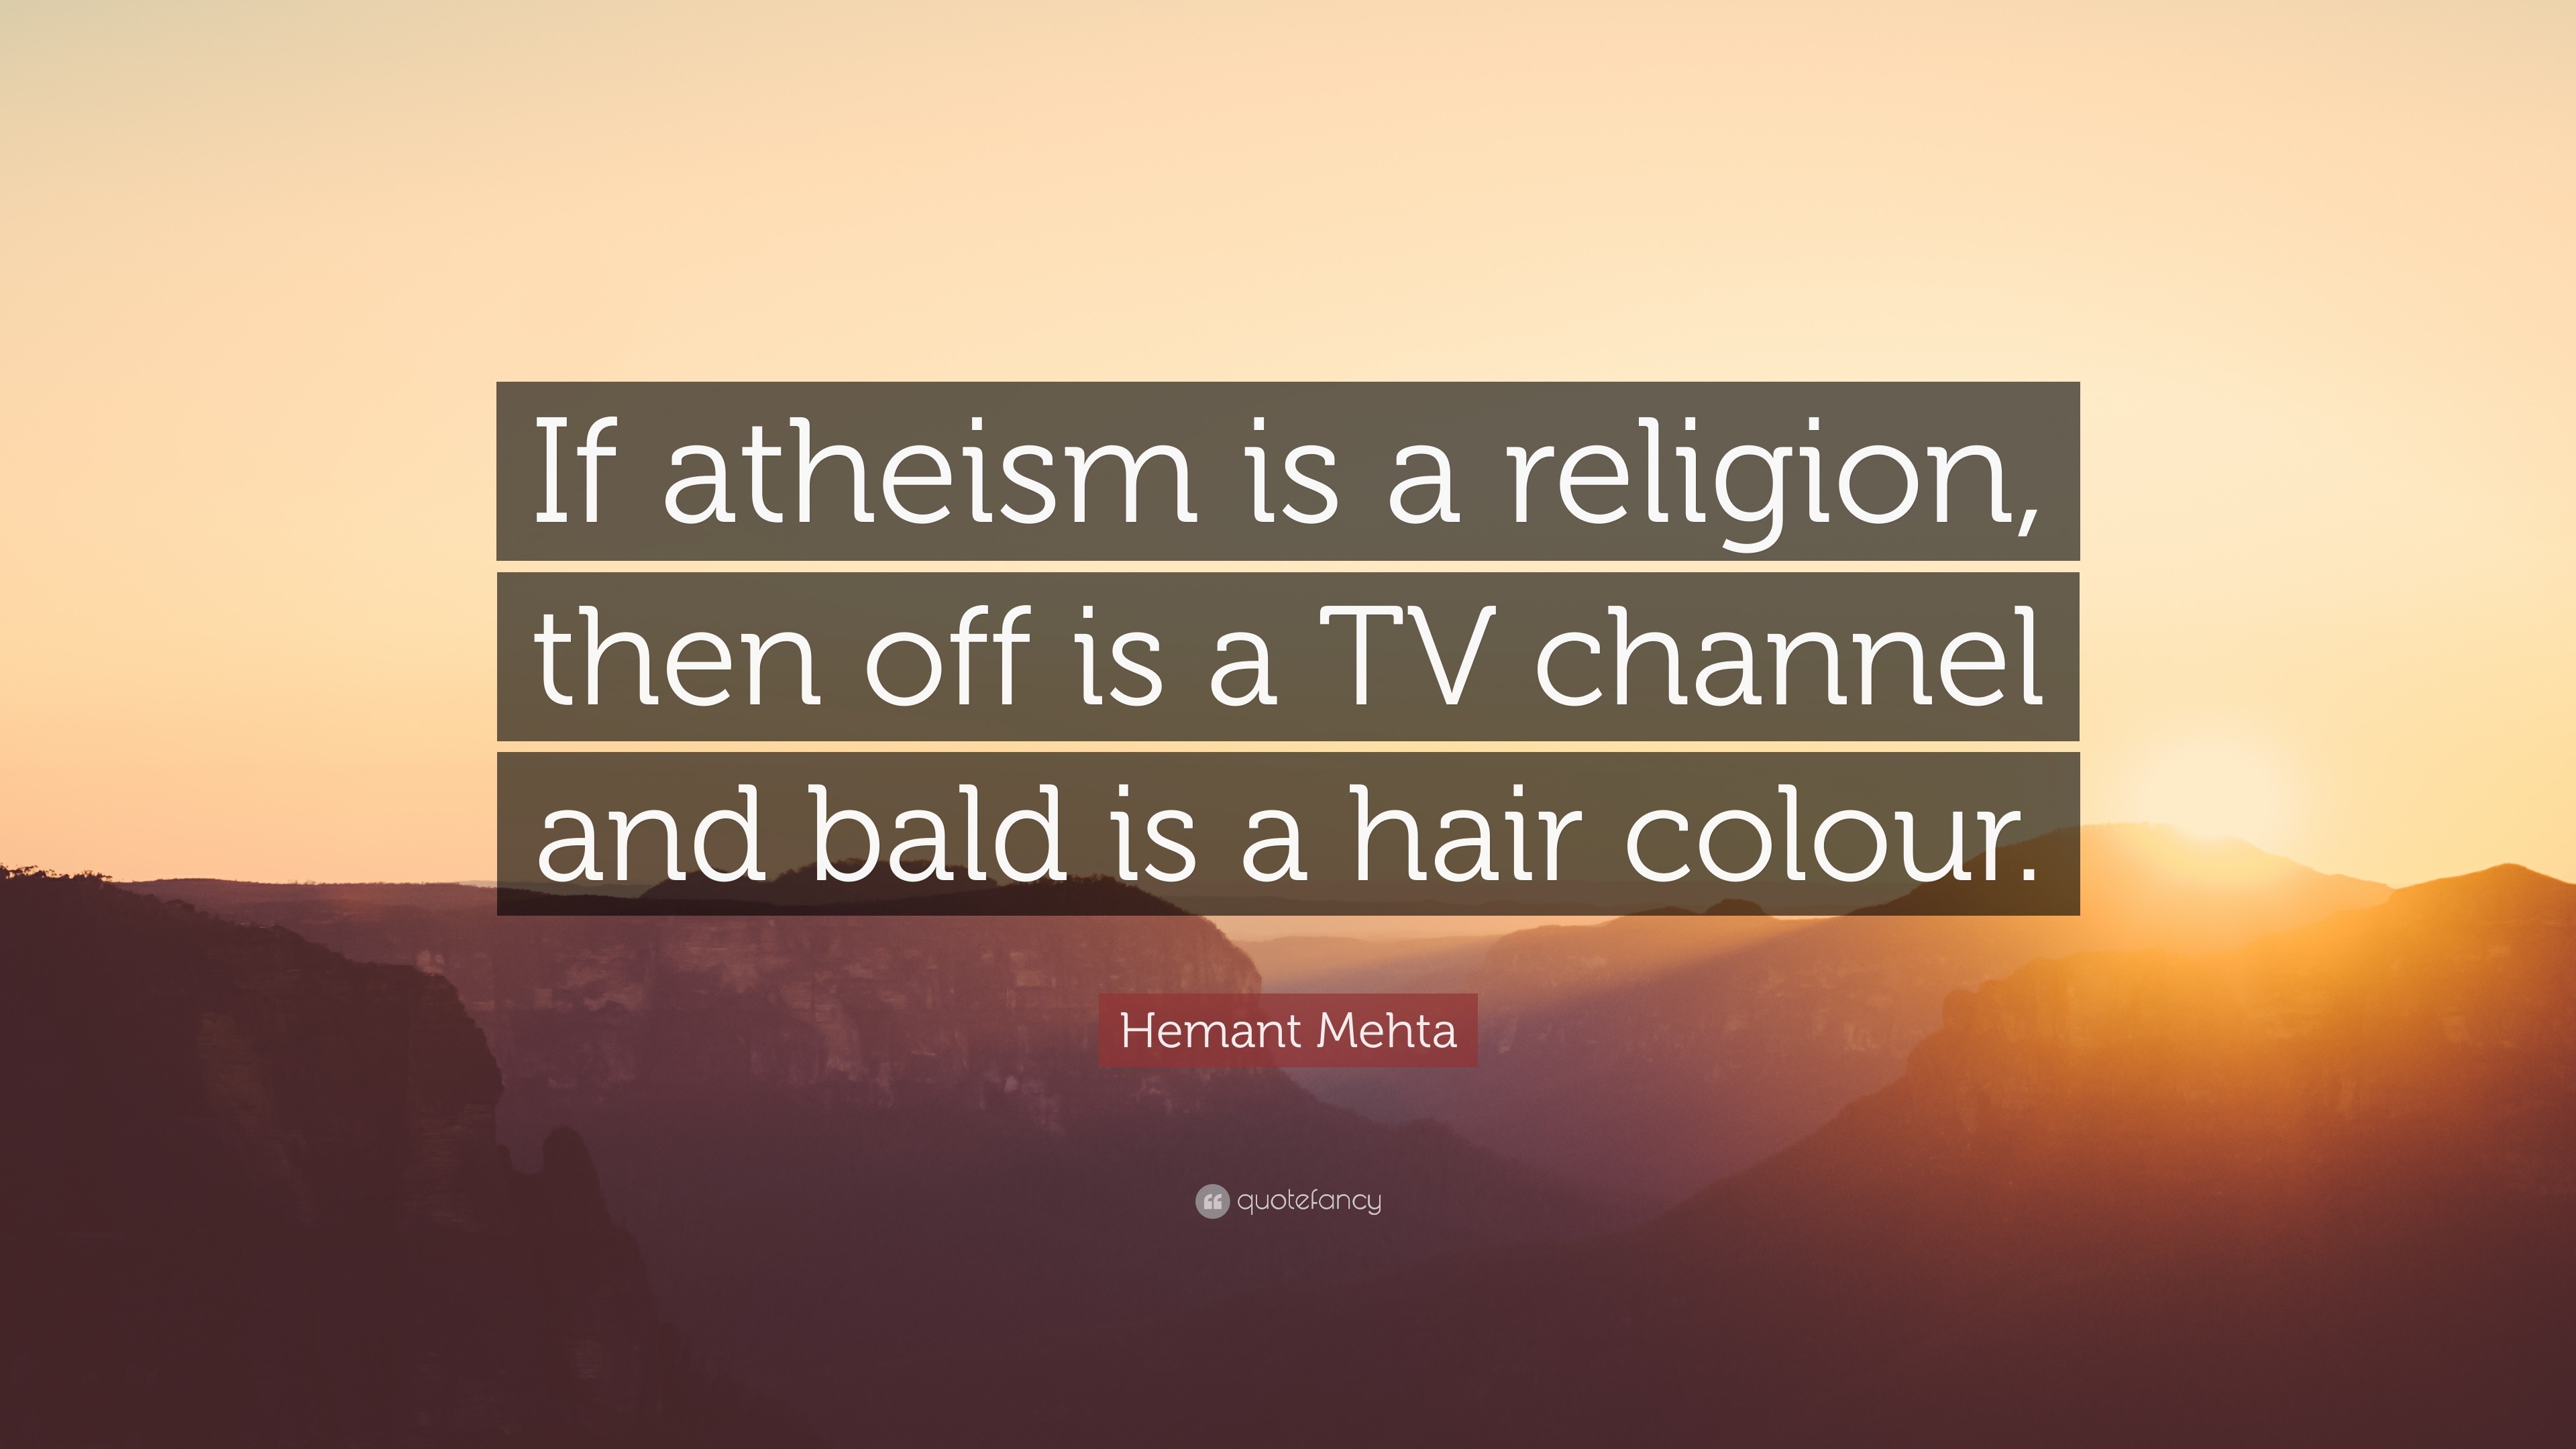 1588843 Hemant Mehta Quote If atheism is a religion then off is a TV